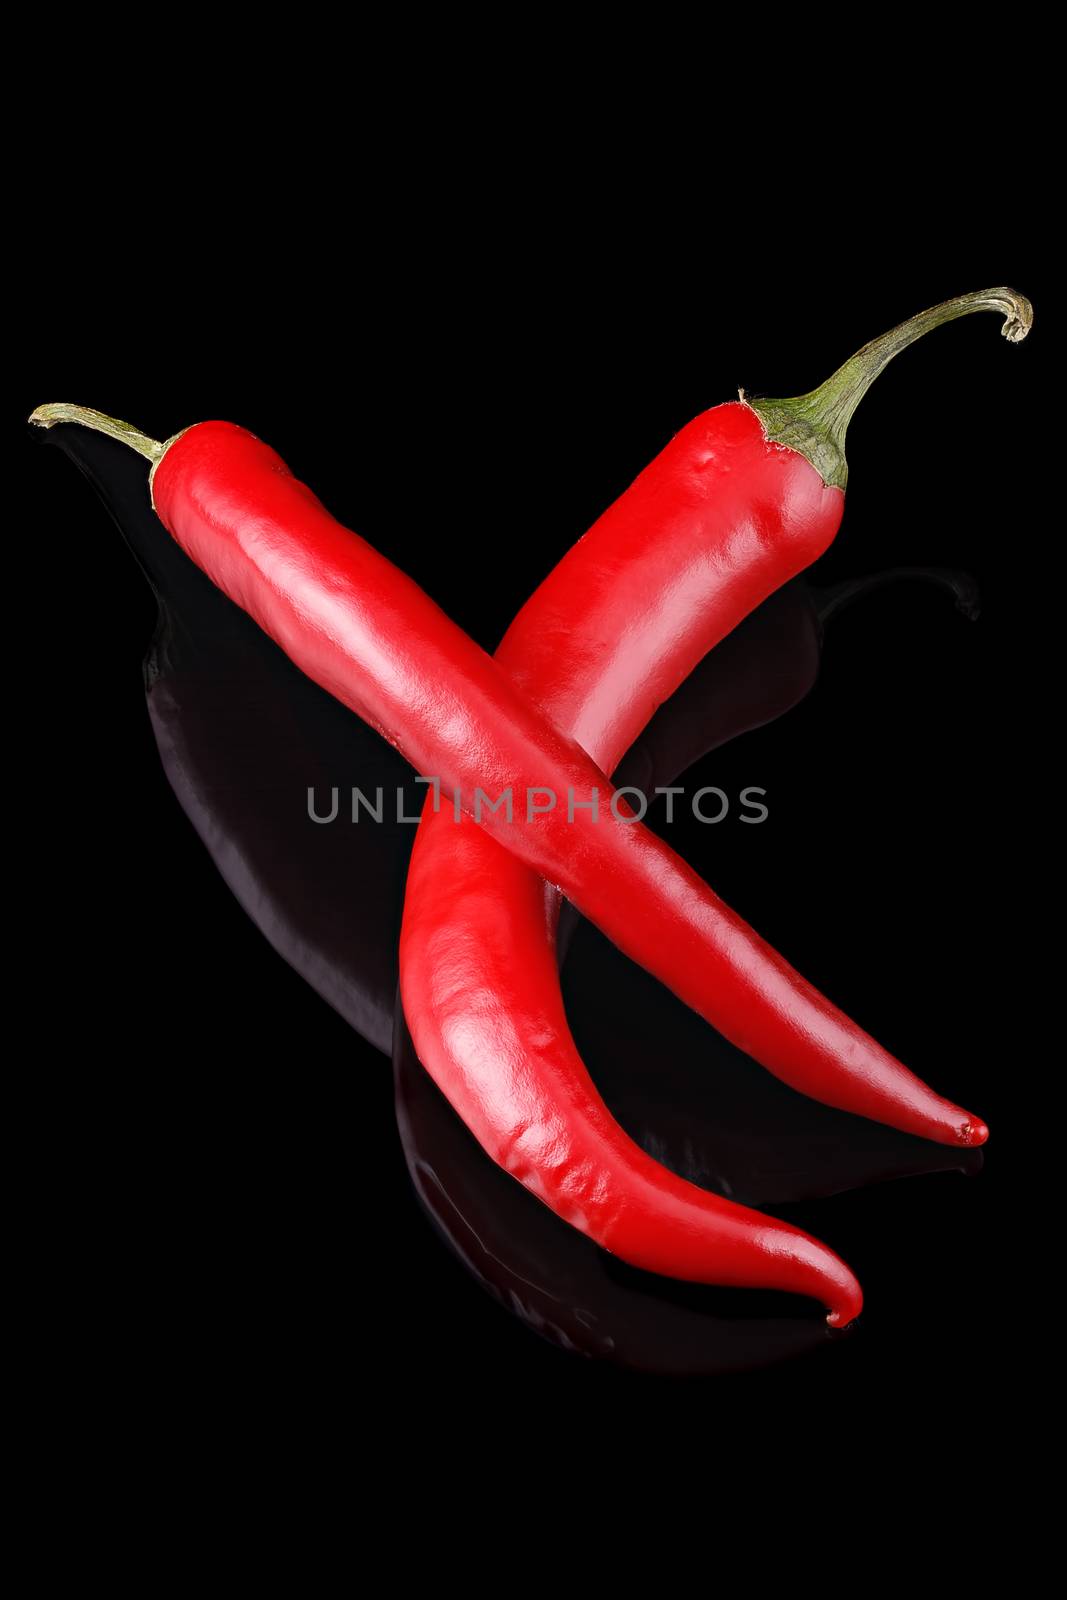 Spicy, fresh red chili on a black background.